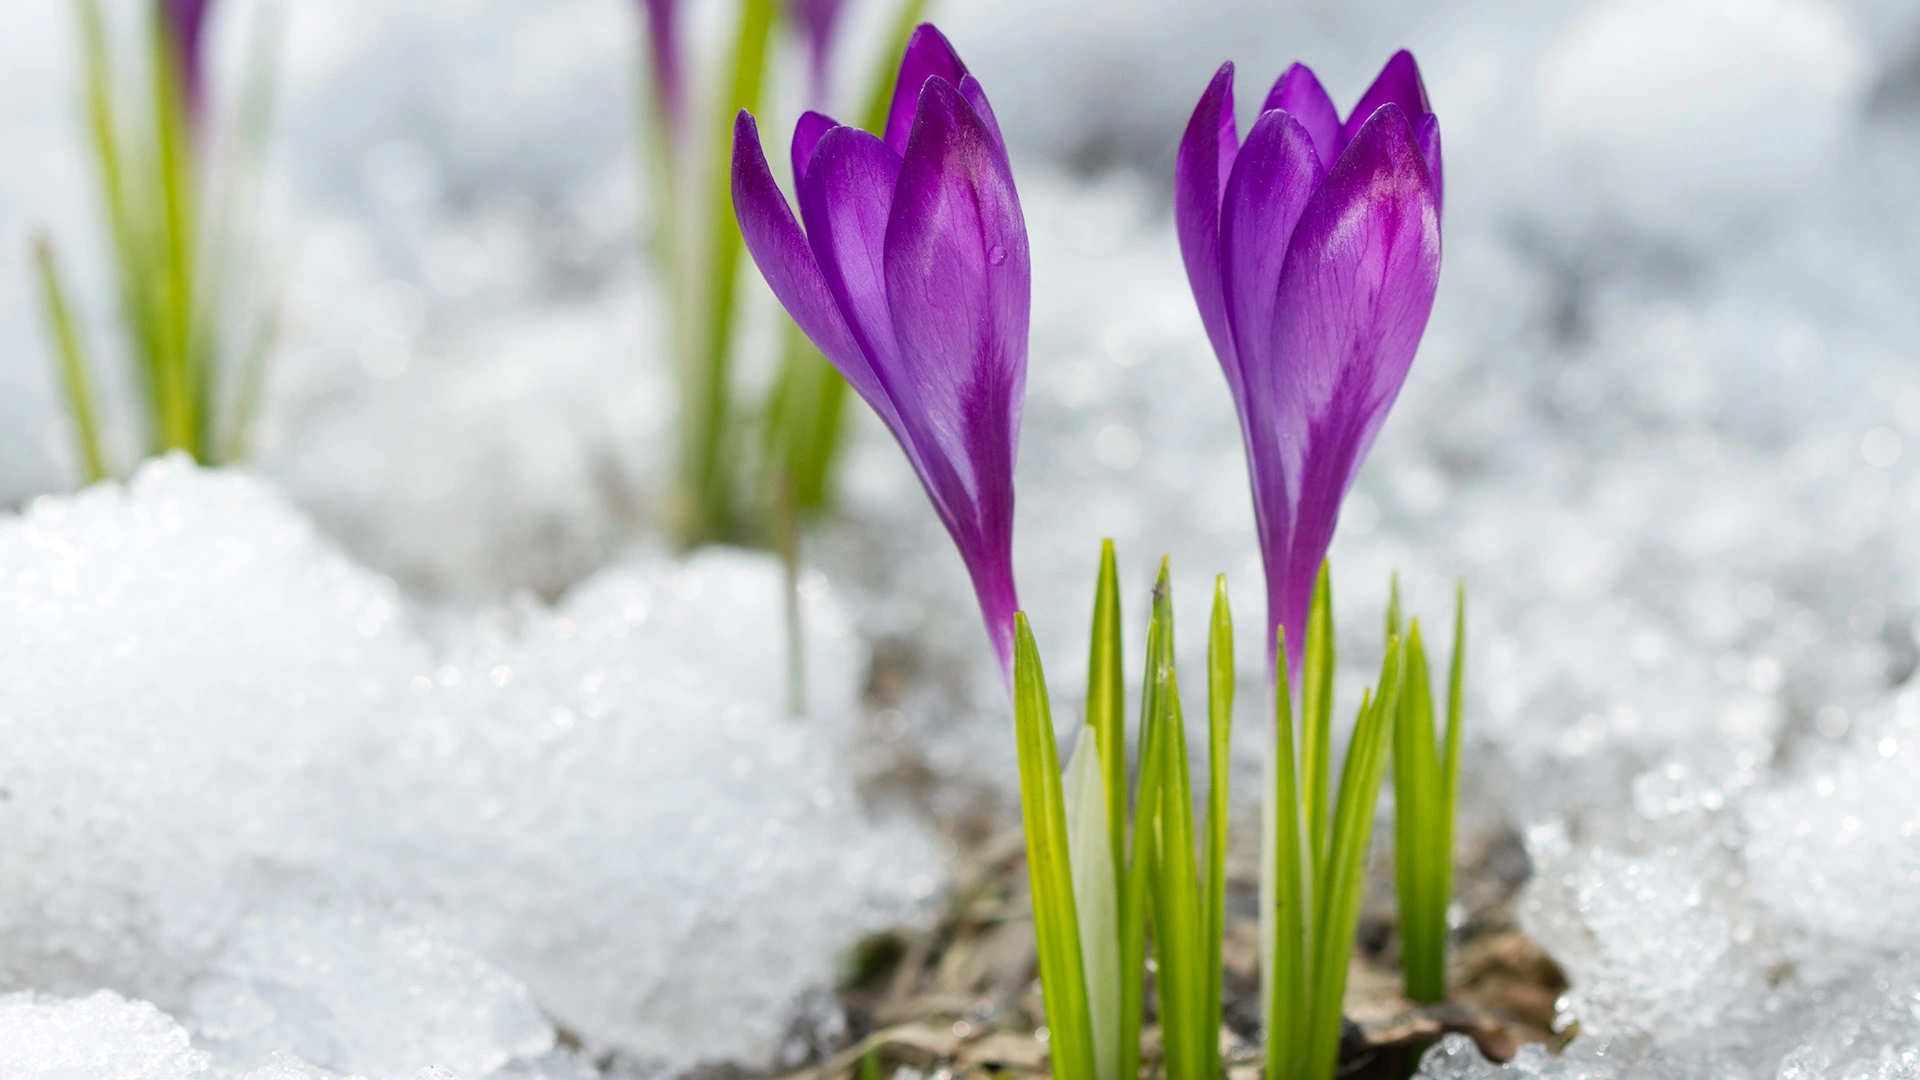 Liven up Your Winter Landscape with These 4 Plants